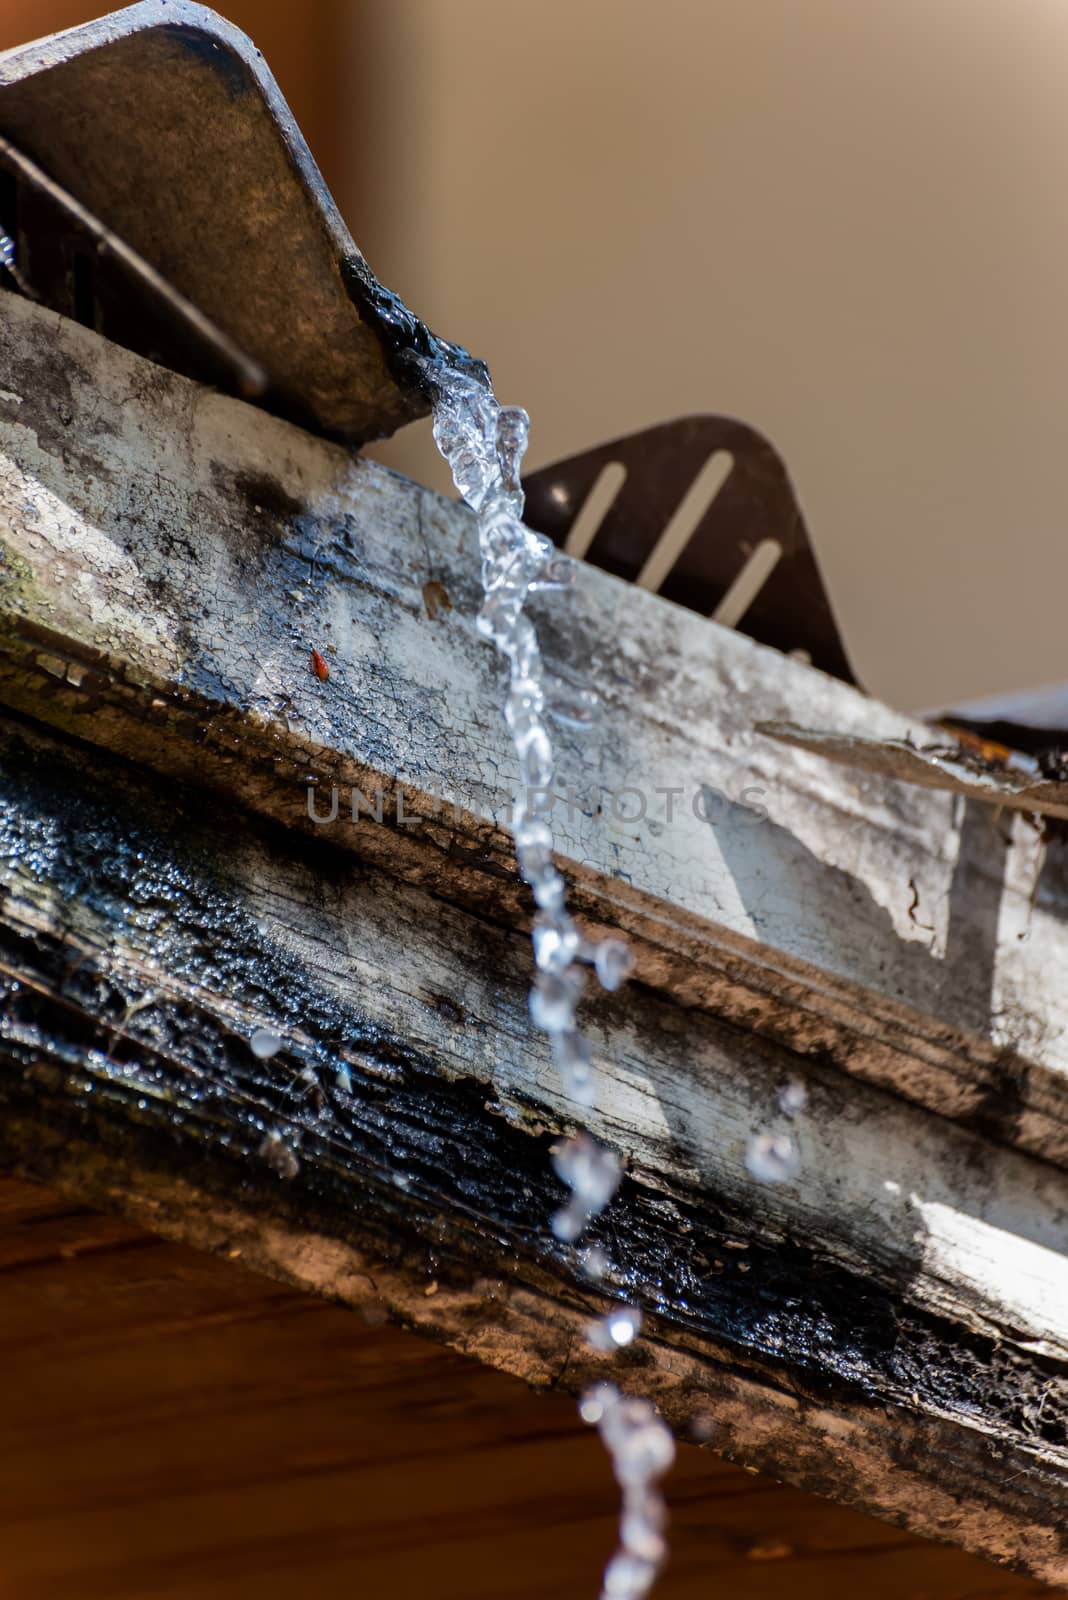 Water drips from the roof. by Soranop01